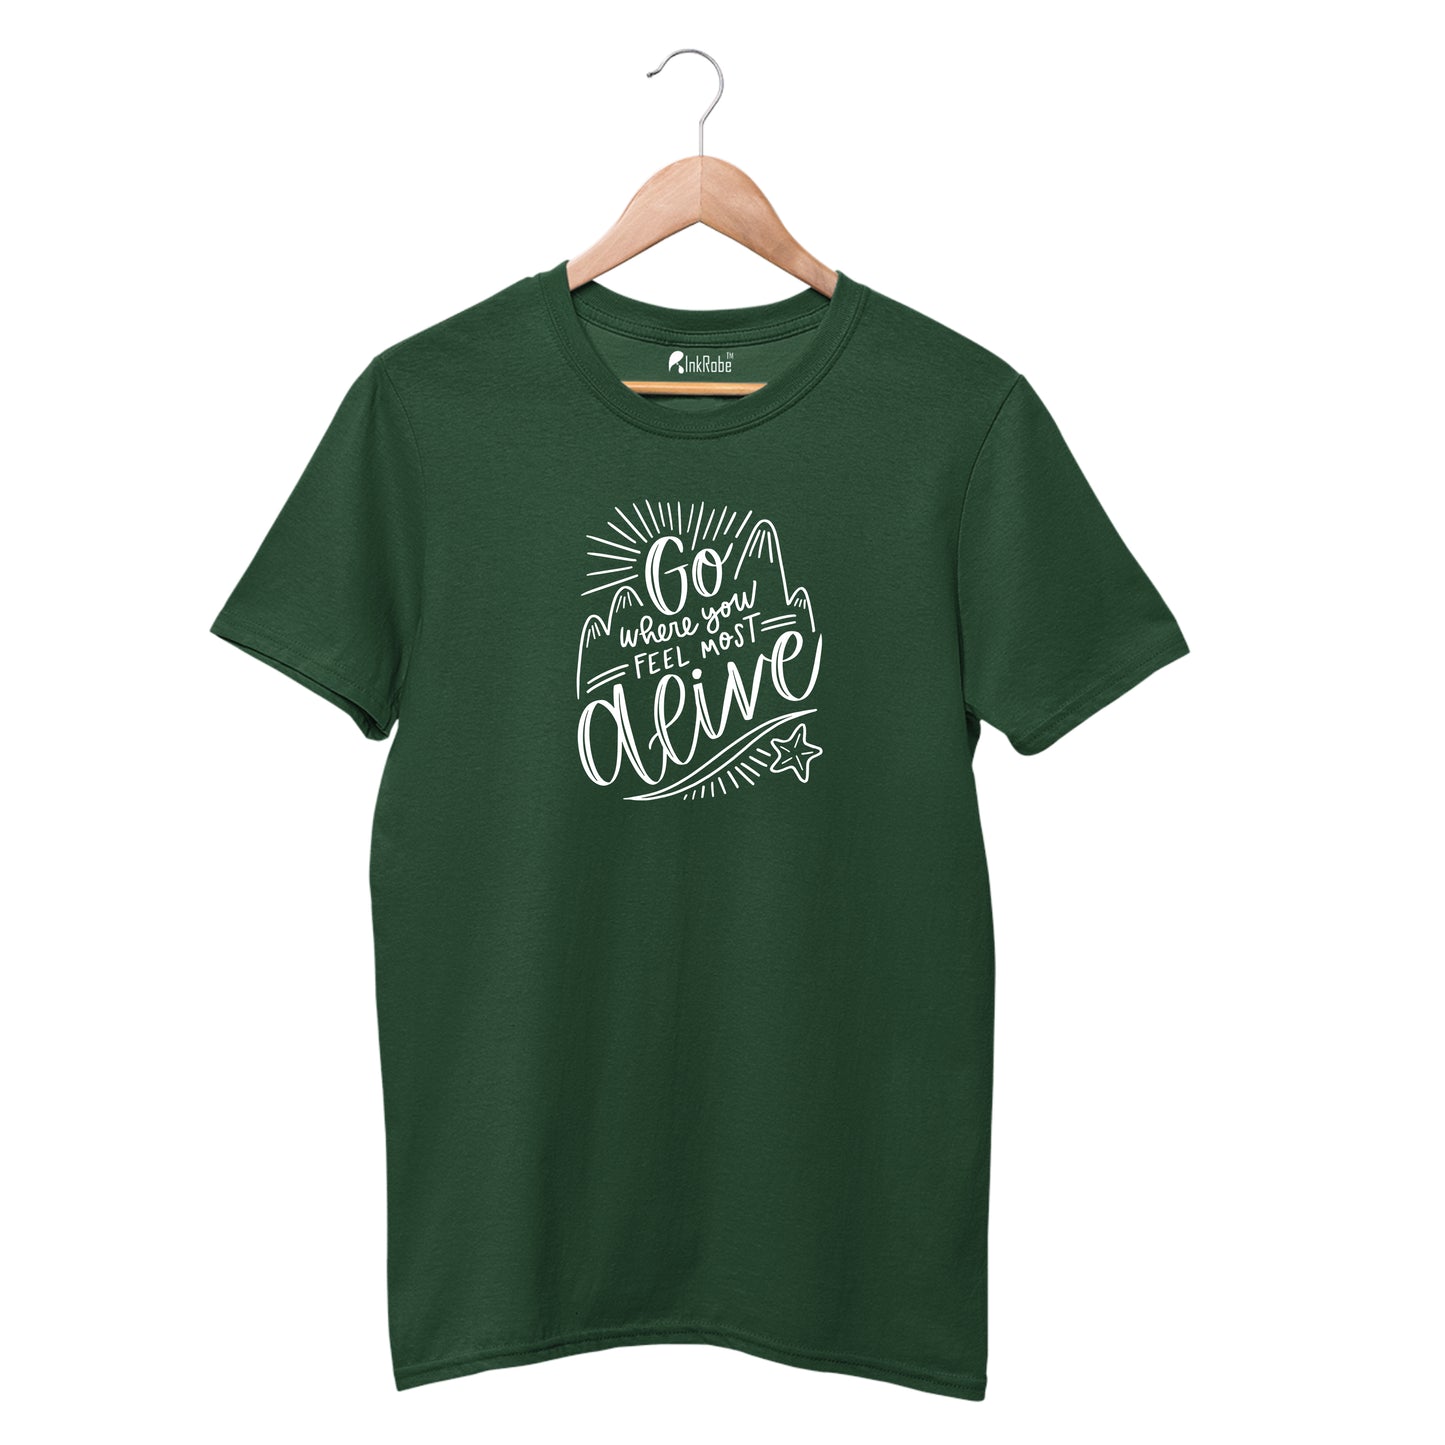 Most Alive T-shirt